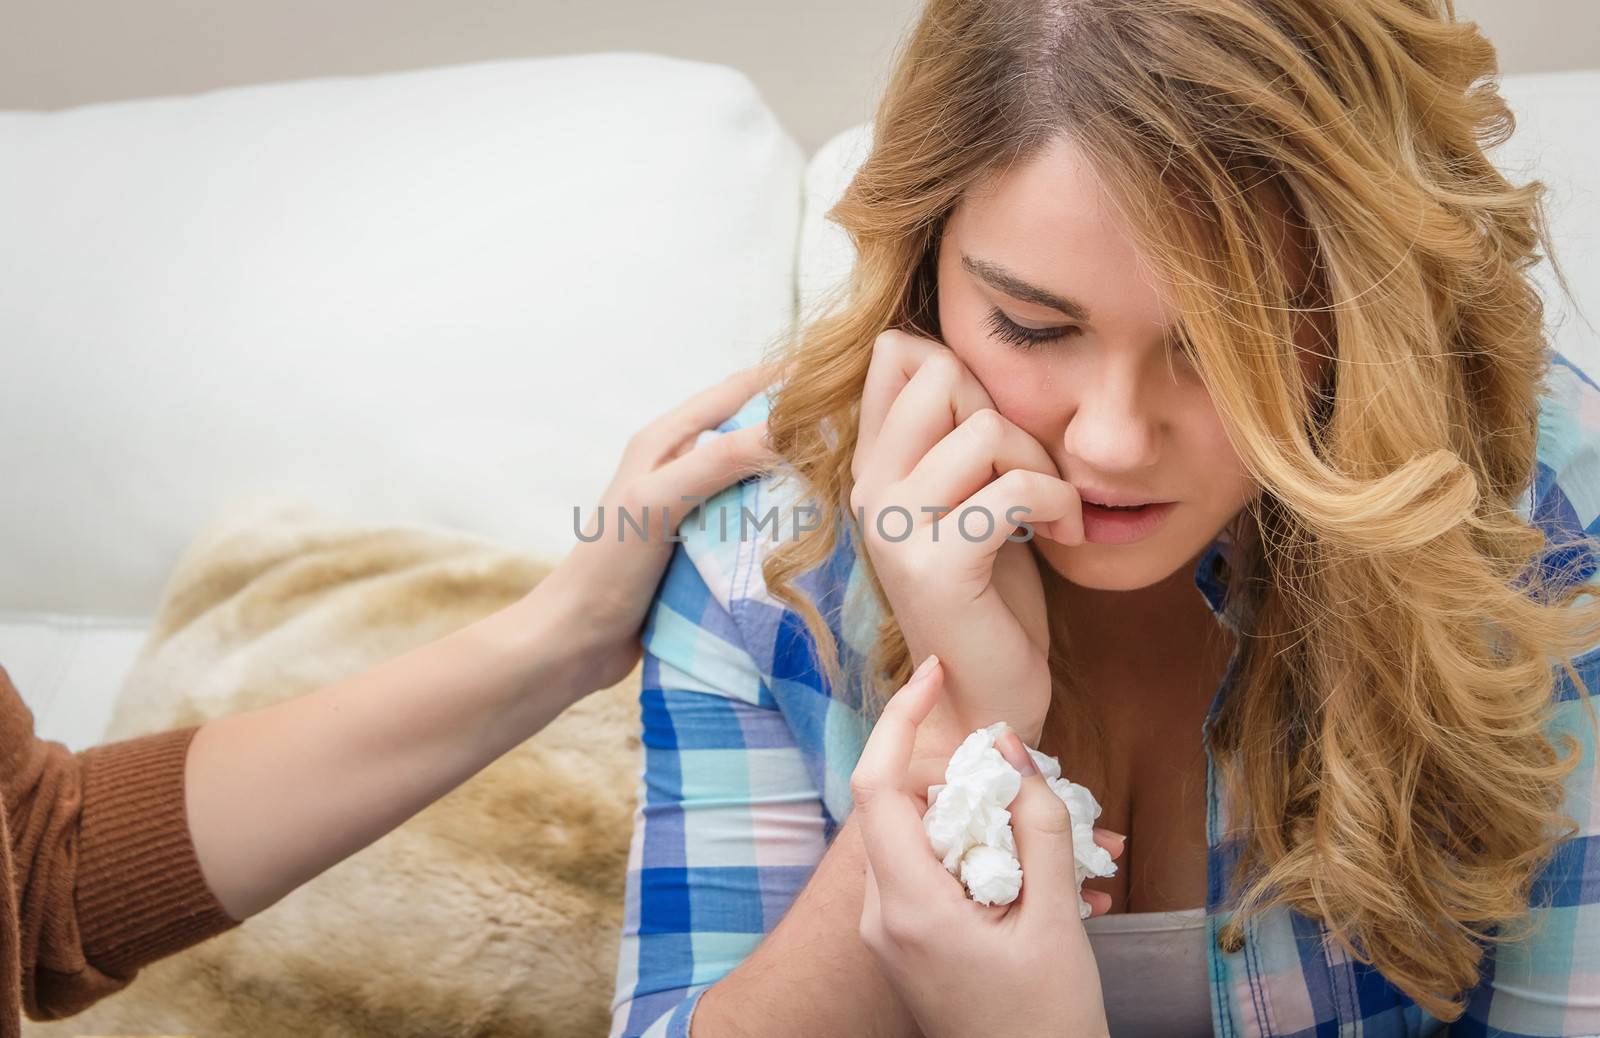 Hands of mother closeup consoling sad teen daughter crying by problems